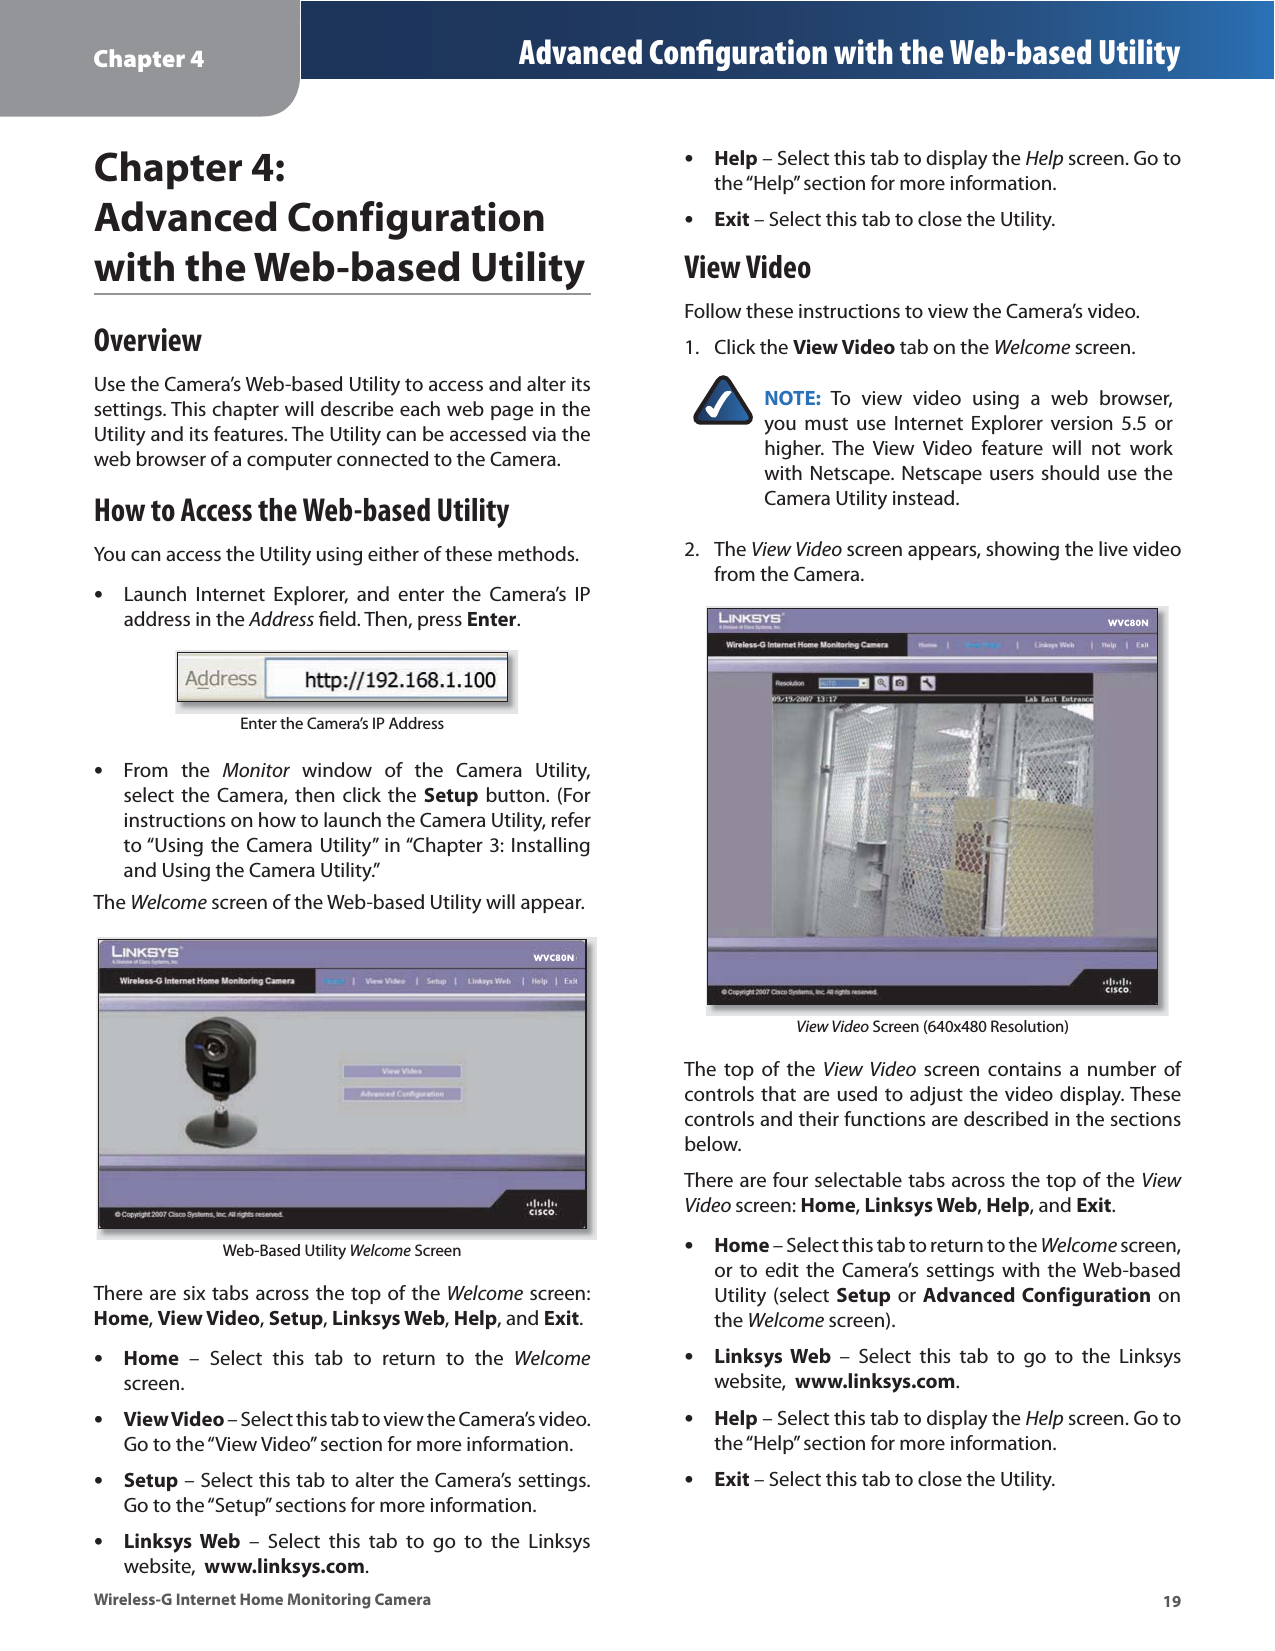 Chapter 4 Advanced Conﬁguration with the Web-based Utility19Wireless-G Internet Home Monitoring CameraChapter 4:Advanced Configurationwith the Web-based UtilityOverviewUse the Camera’s Web-based Utility to access and alter its settings. This chapter will describe each web page in the Utility and its features. The Utility can be accessed via the web browser of a computer connected to the Camera.How to Access the Web-based UtilityYou can access the Utility using either of these methods.Launch Internet Explorer, and enter the Camera’s IP address in the Address ﬁeld. Then, press Enter.Enter the Camera’s IP AddressFrom the Monitor window of the Camera Utility, select the Camera, then click the Setup button. (For instructions on how to launch the Camera Utility, refer to “Using the Camera Utility” in “Chapter 3: Installing and Using the Camera Utility.”The Welcome screen of the Web-based Utility will appear. Web-Based Utility Welcome ScreenThere are six tabs across the top of the Welcome screen: Home,View Video,Setup,Linksys Web,Help, and Exit.Home – Select this tab to return to the Welcomescreen.View Video – Select this tab to view the Camera’s video. Go to the “View Video” section for more information.Setup – Select this tab to alter the Camera’s settings. Go to the “Setup” sections for more information.Linksys Web – Select this tab to go to the Linksys website,  www.linksys.com.••••••Help – Select this tab to display the Help screen. Go to the “Help” section for more information.Exit – Select this tab to close the Utility.View VideoFollow these instructions to view the Camera’s video.Click the View Video tab on the Welcome screen.NOTE: To view video using a web browser, you must use Internet Explorer version 5.5 or higher. The View Video feature will not work with Netscape. Netscape users should use the Camera Utility instead.The View Video screen appears, showing the live video from the Camera.View Video Screen (640x480 Resolution)The top of the View Video screen contains a number of controls that are used to adjust the video display. These controls and their functions are described in the sections below.There are four selectable tabs across the top of the View Video screen: Home,Linksys Web,Help, and Exit.Home – Select this tab to return to the Welcome screen, or to edit the Camera’s settings with the Web-based Utility (select Setup or Advanced Configuration on the Welcome screen).Linksys Web – Select this tab to go to the Linksys website,  www.linksys.com.Help – Select this tab to display the Help screen. Go to the “Help” section for more information.Exit – Select this tab to close the Utility.••1.2.••••